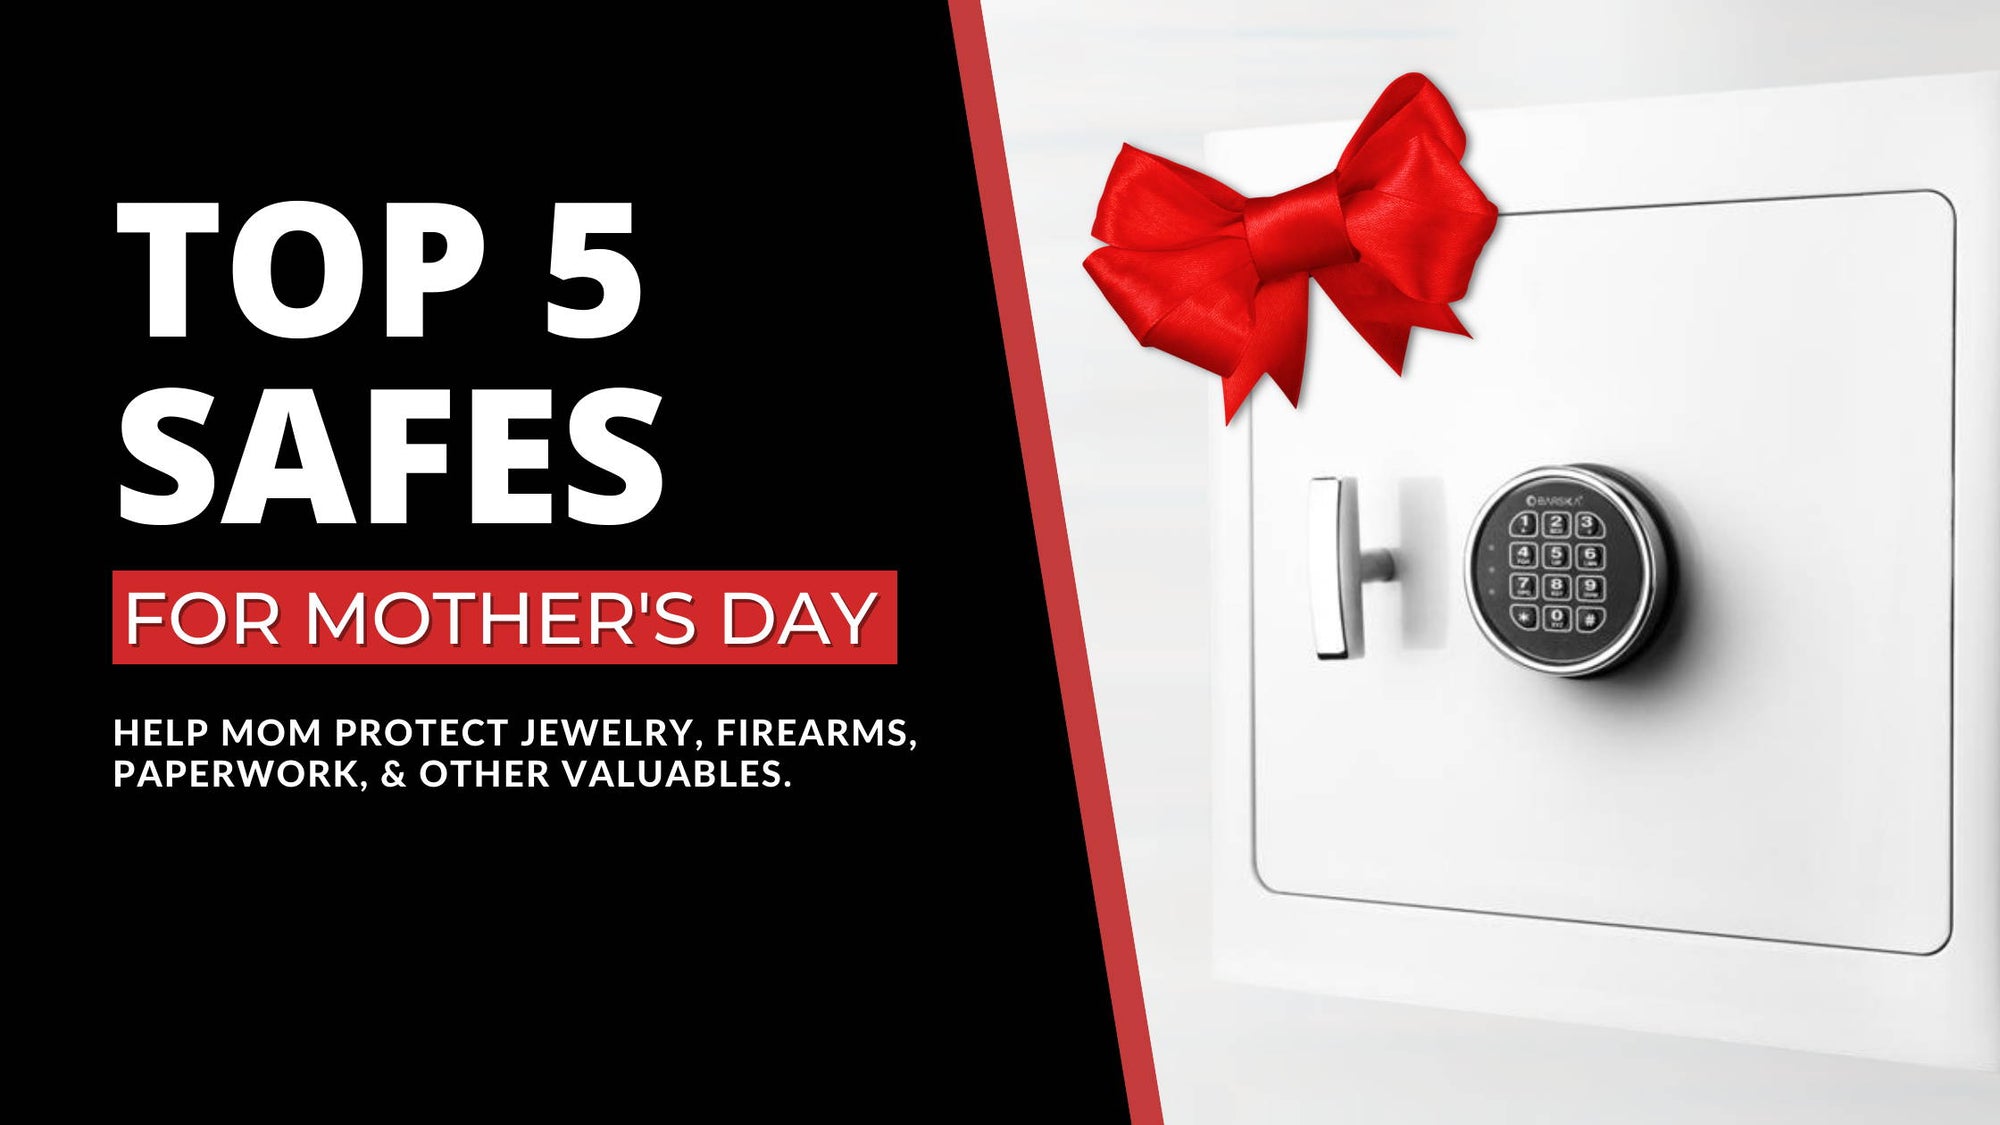 Top 5 Safes for Mother's Day